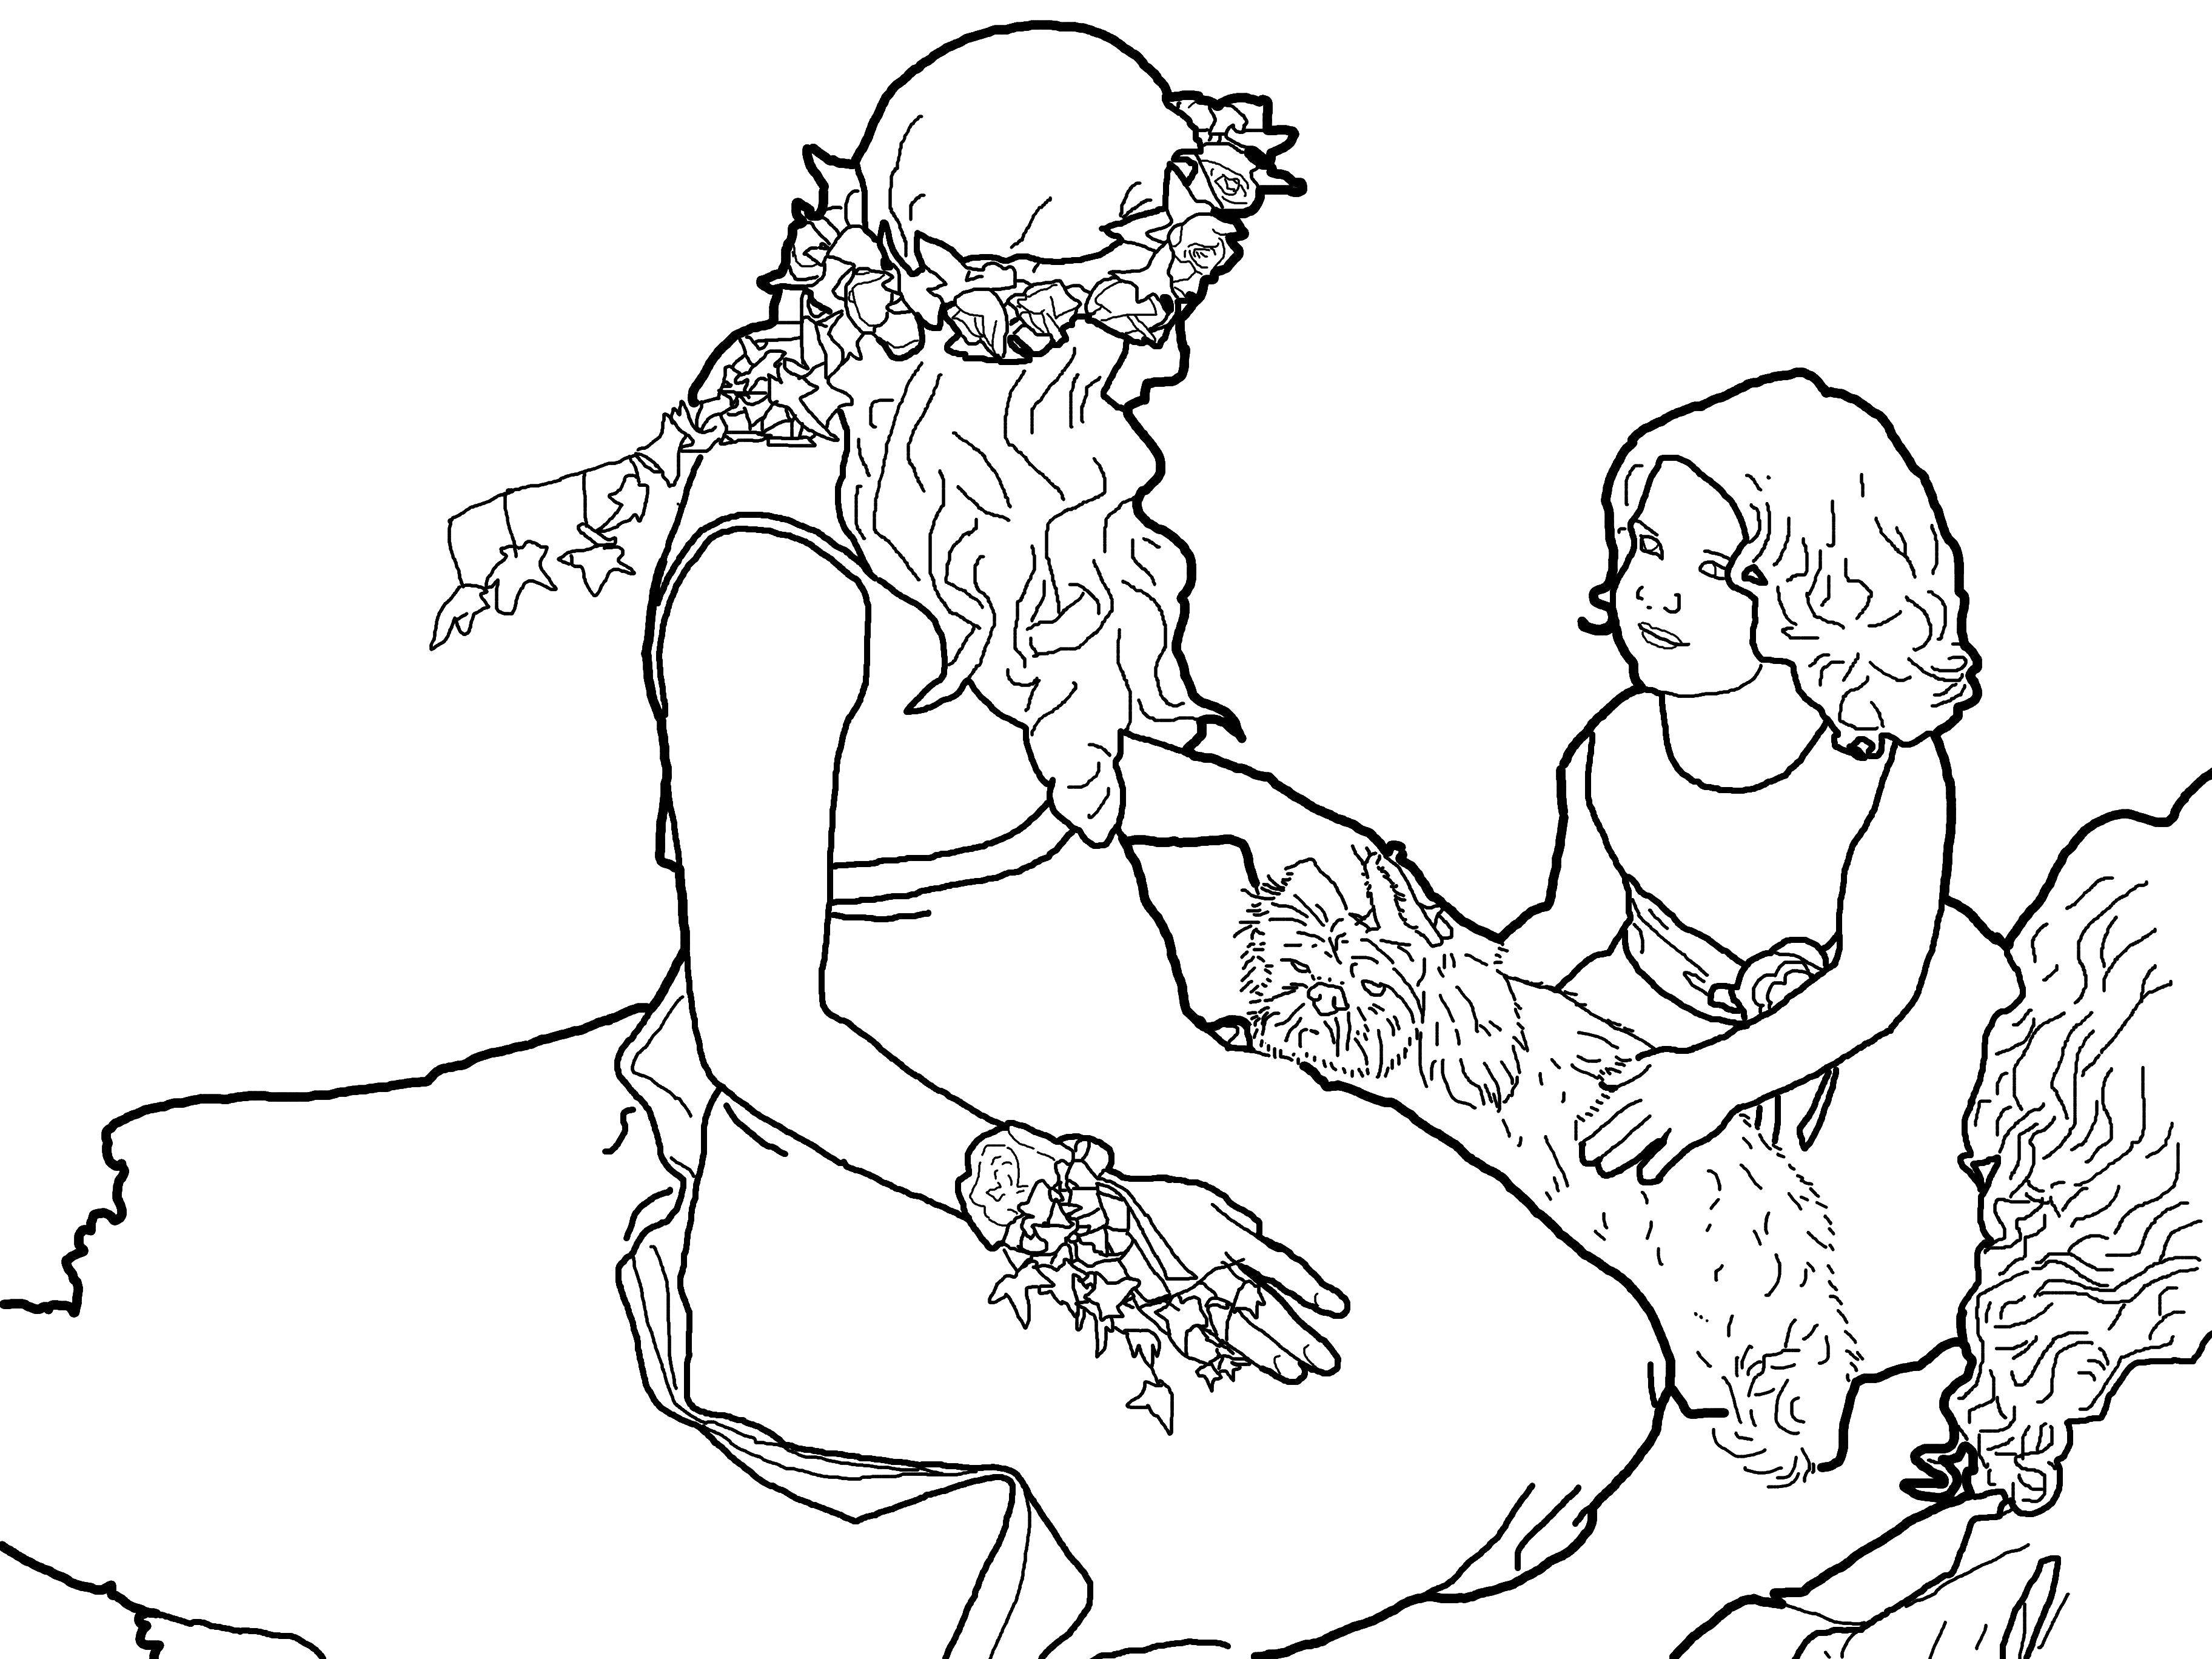 Coloring The bride and children. Category Wedding. Tags:  bride, girl, doggy.